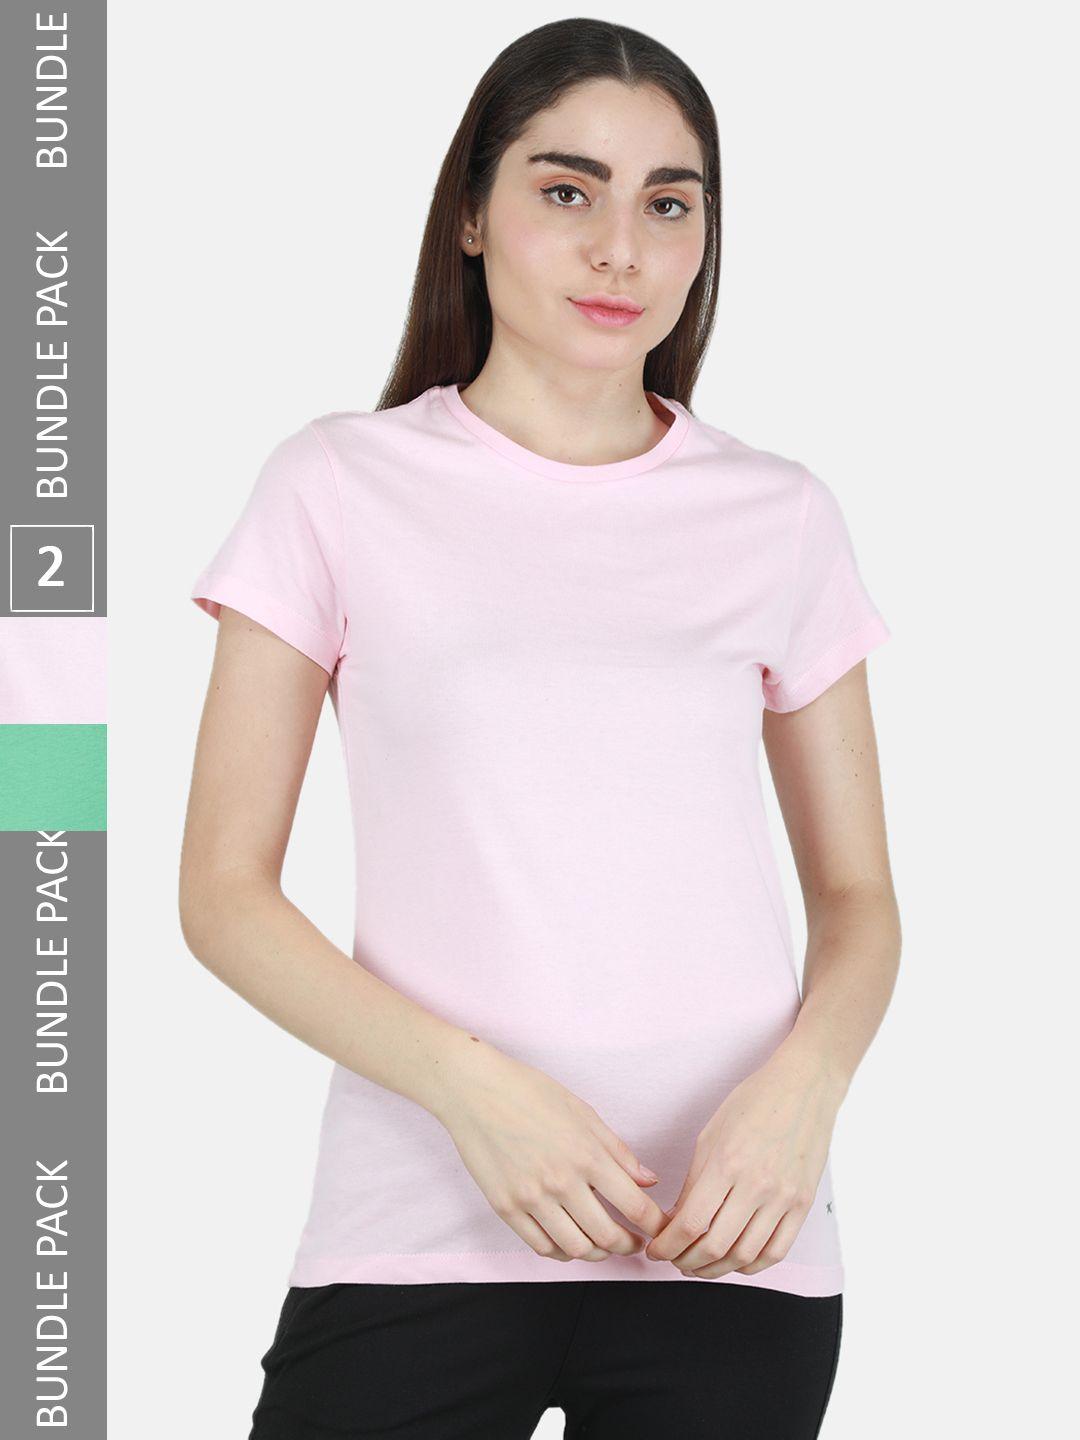 monte-carlo-women-pack-of-2-cotton-round-neck-tops